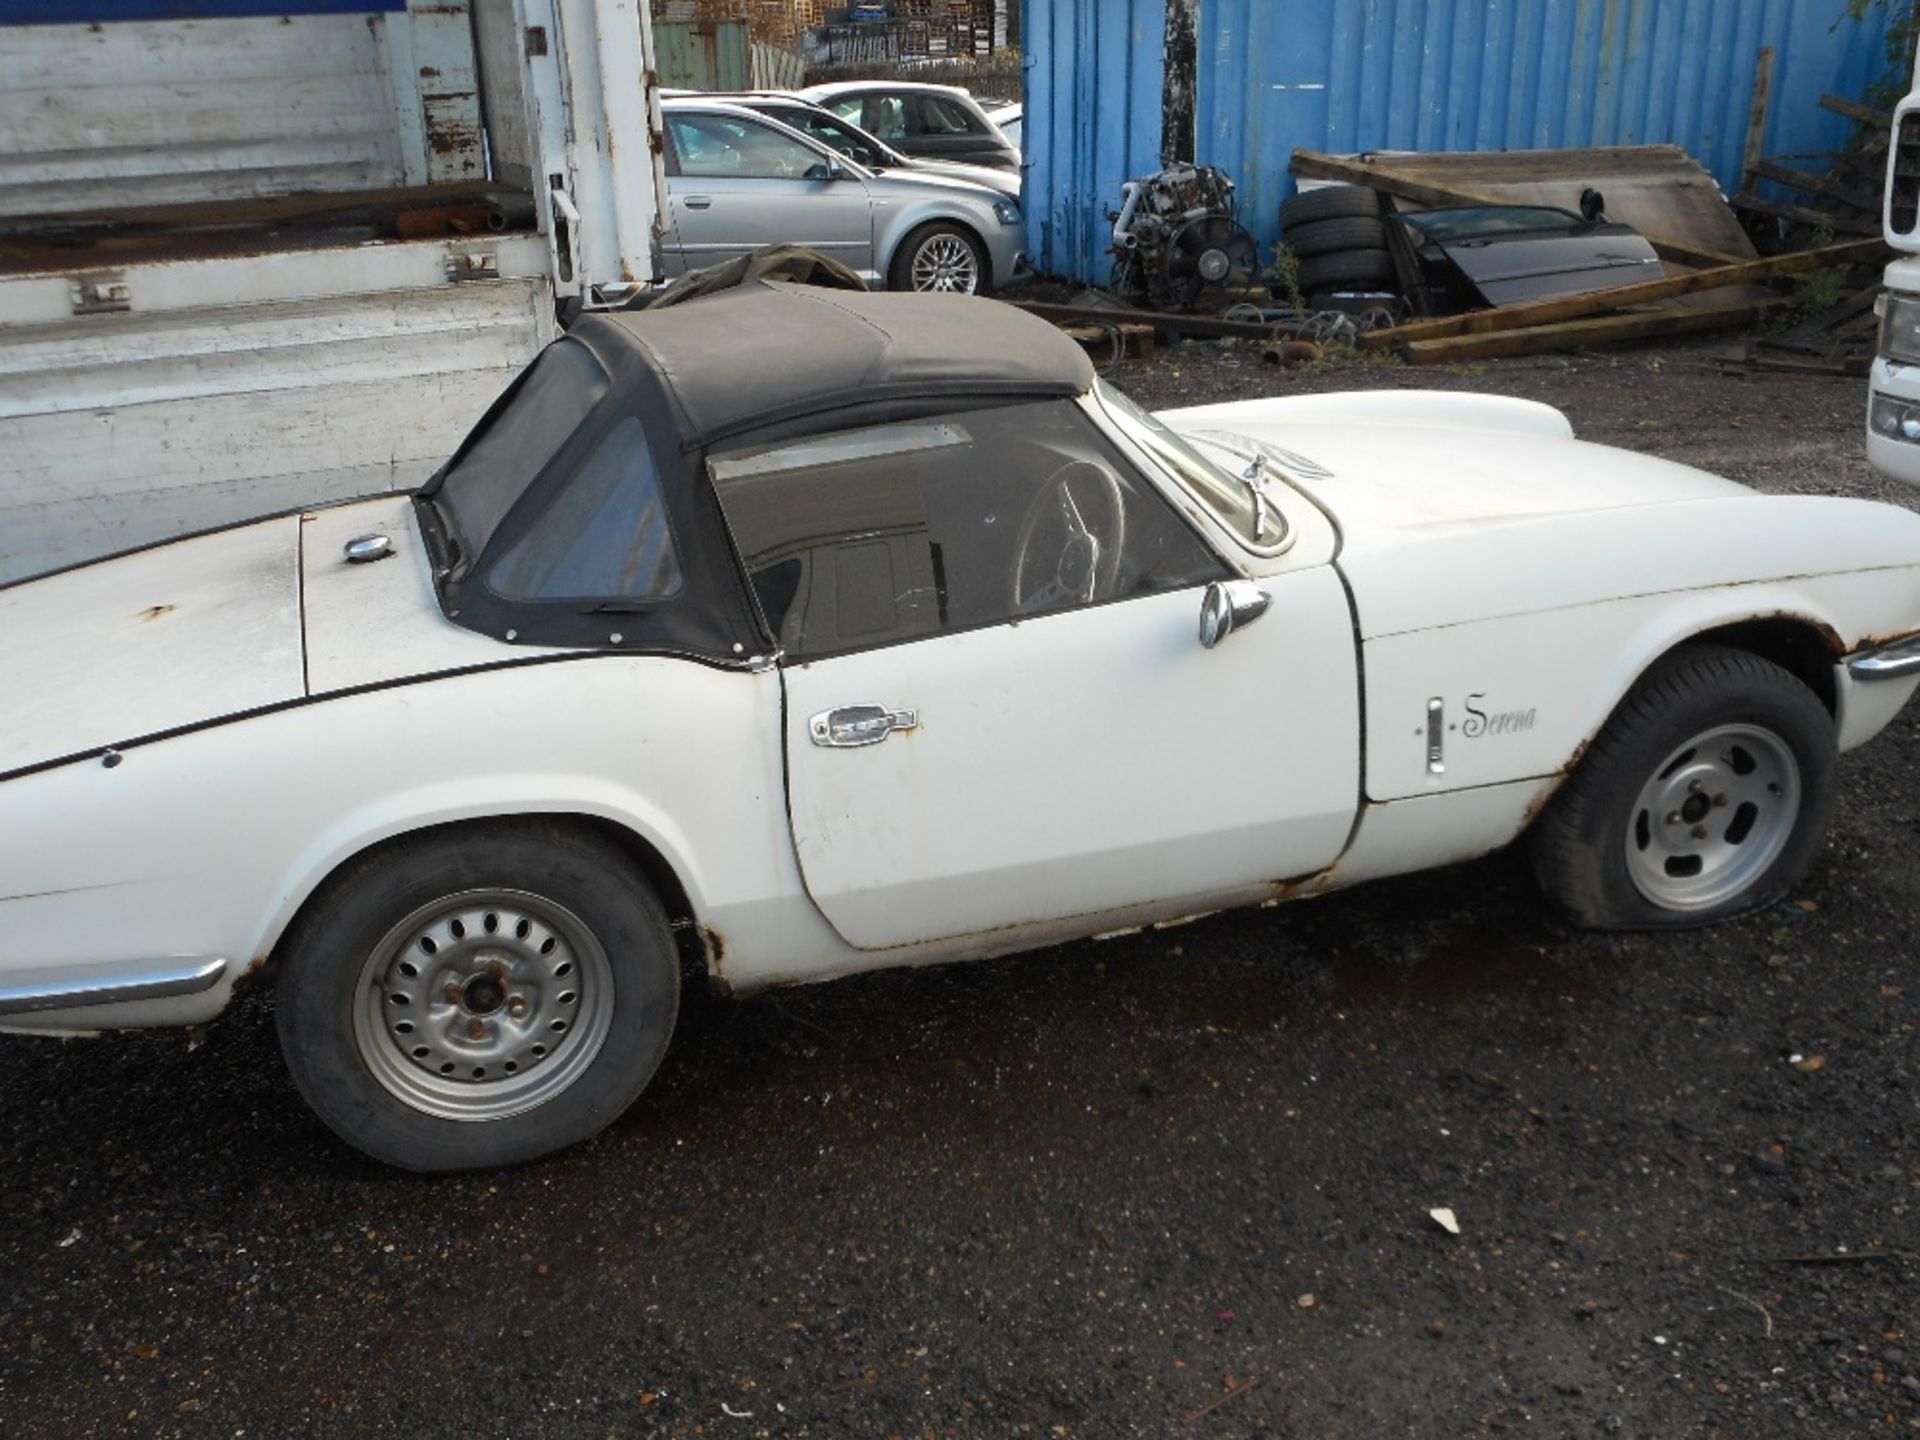 Triumph Spitfire soft top car for restoration. Also includes hard top as shown.